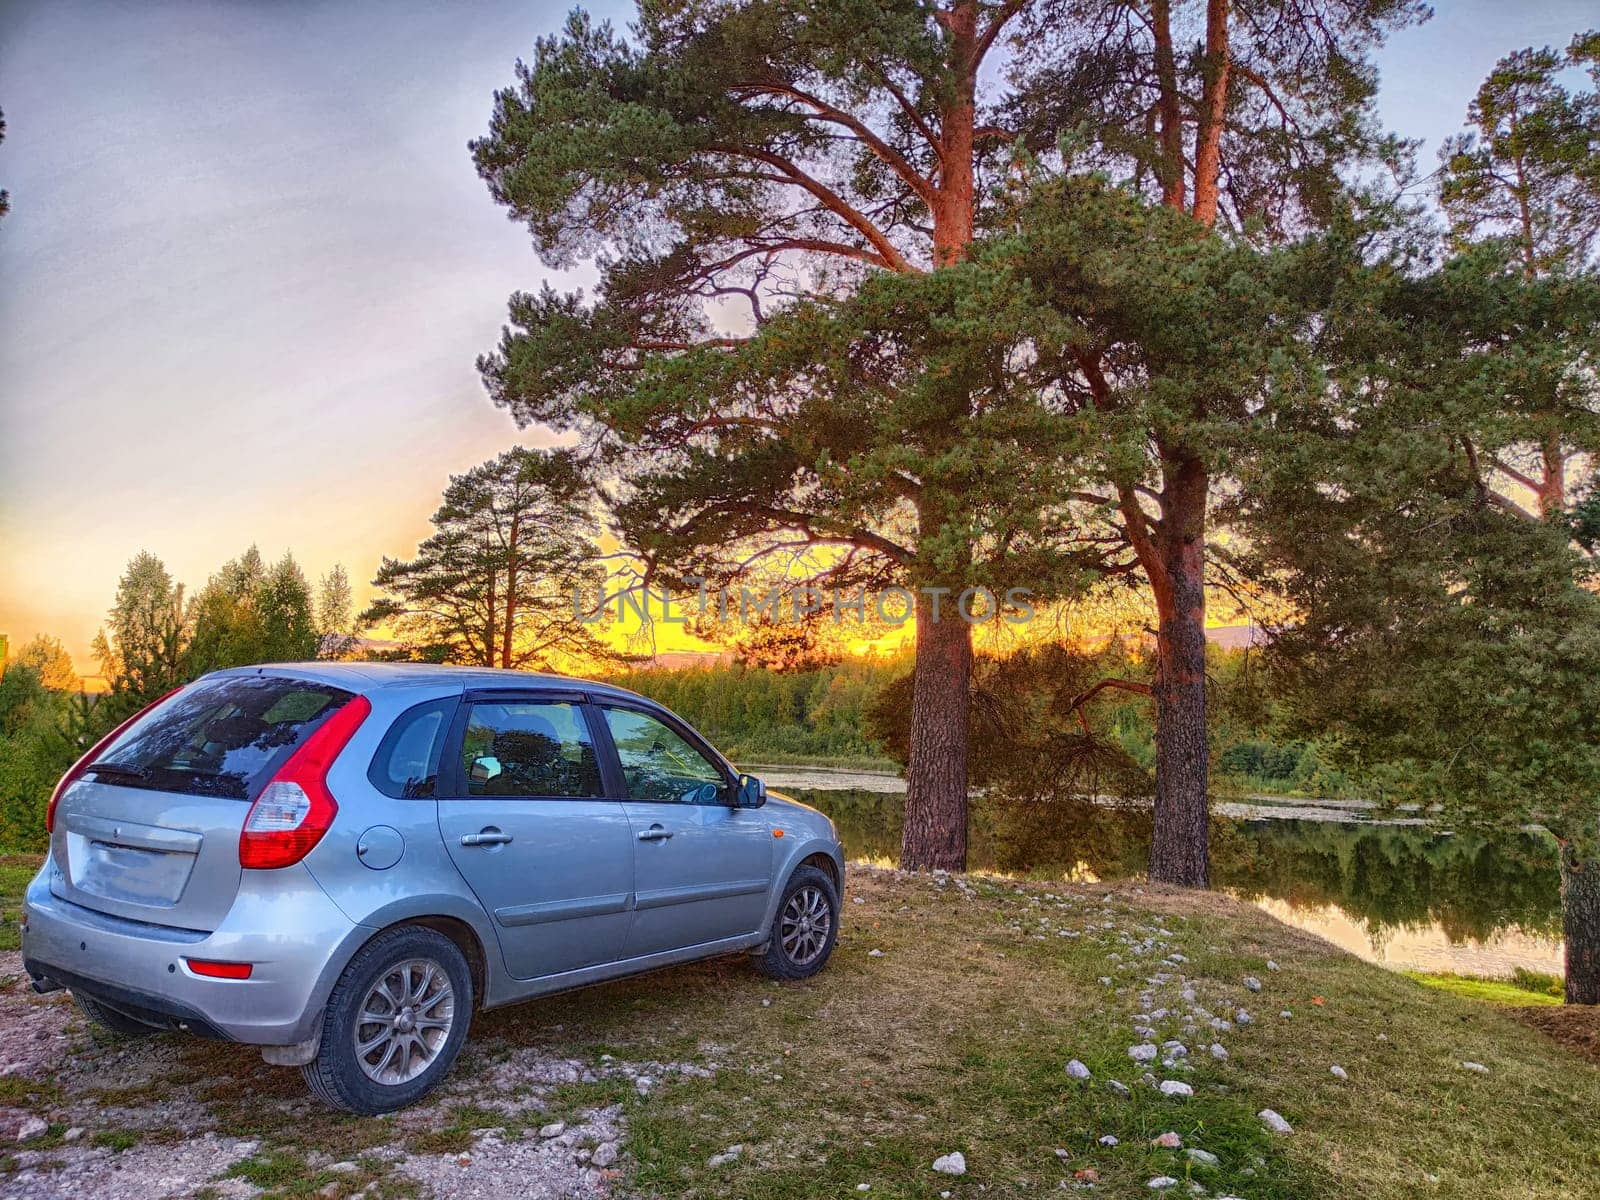 Twilight Road Trip Break in Forested Area. Car parked beside lake during a sunset break in the forest